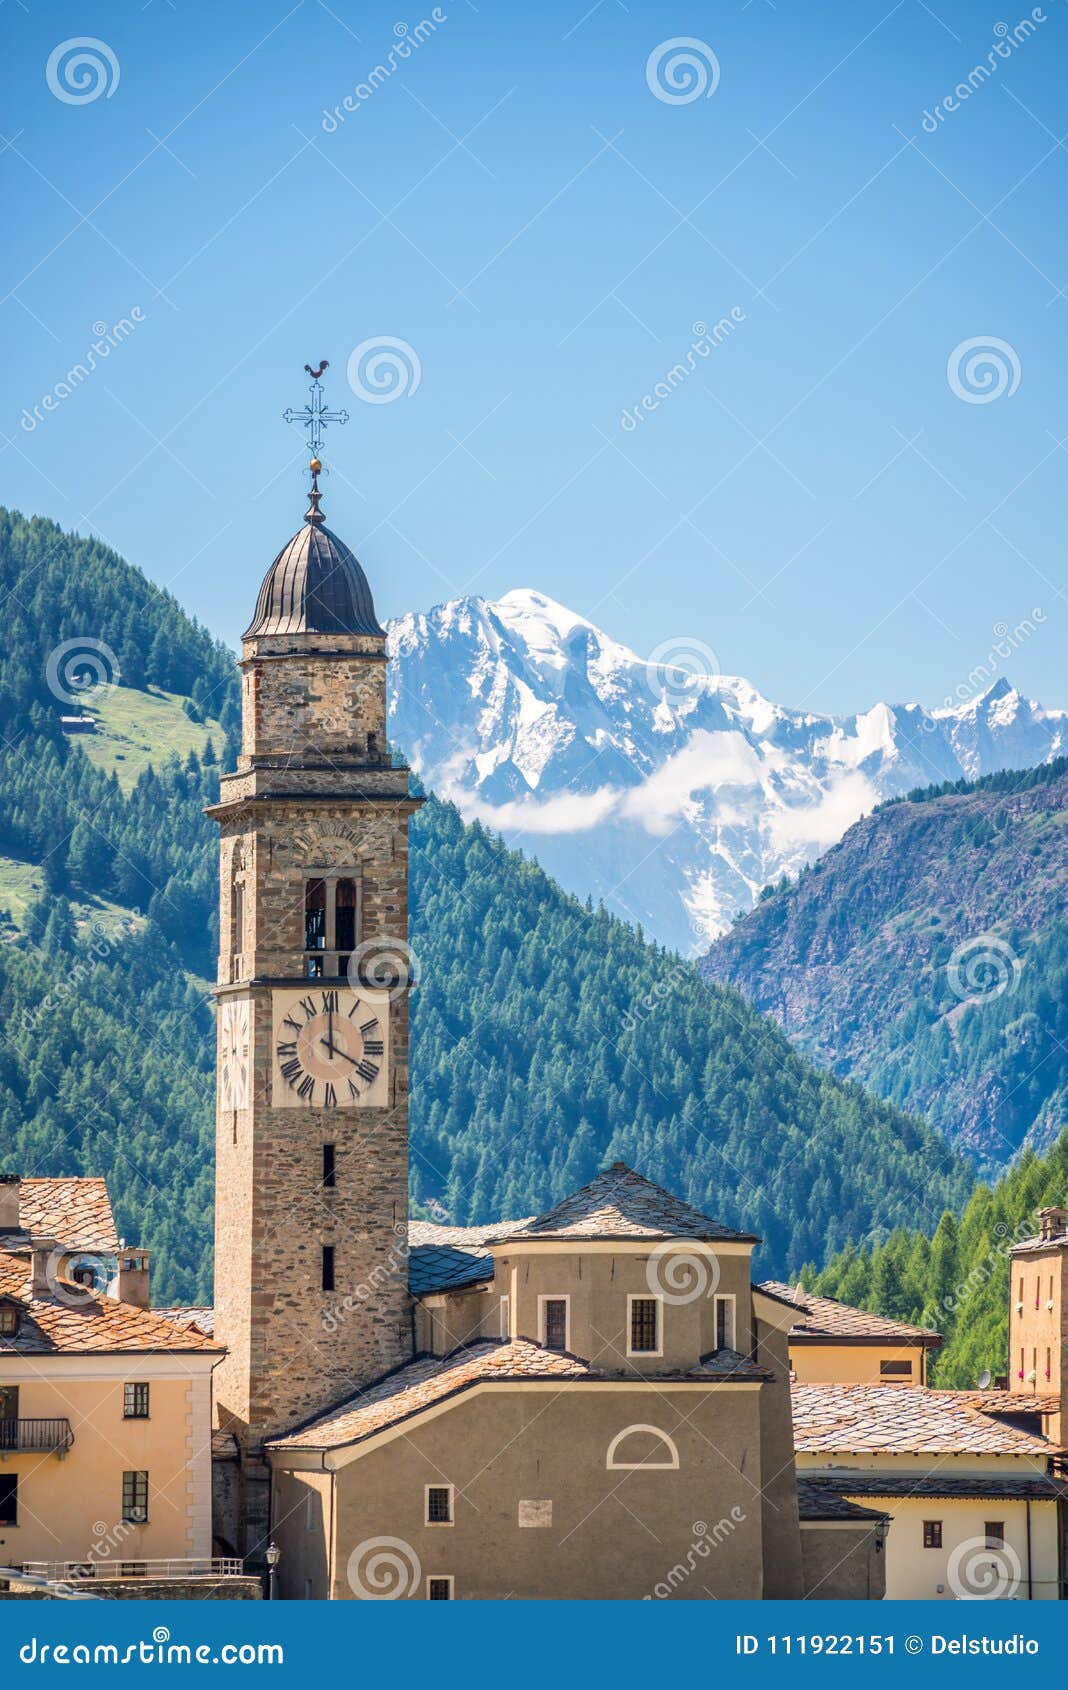 church of cogne, monte bianco mont blanc in the background, grand paradiso national park, aosta valley in the alps italy